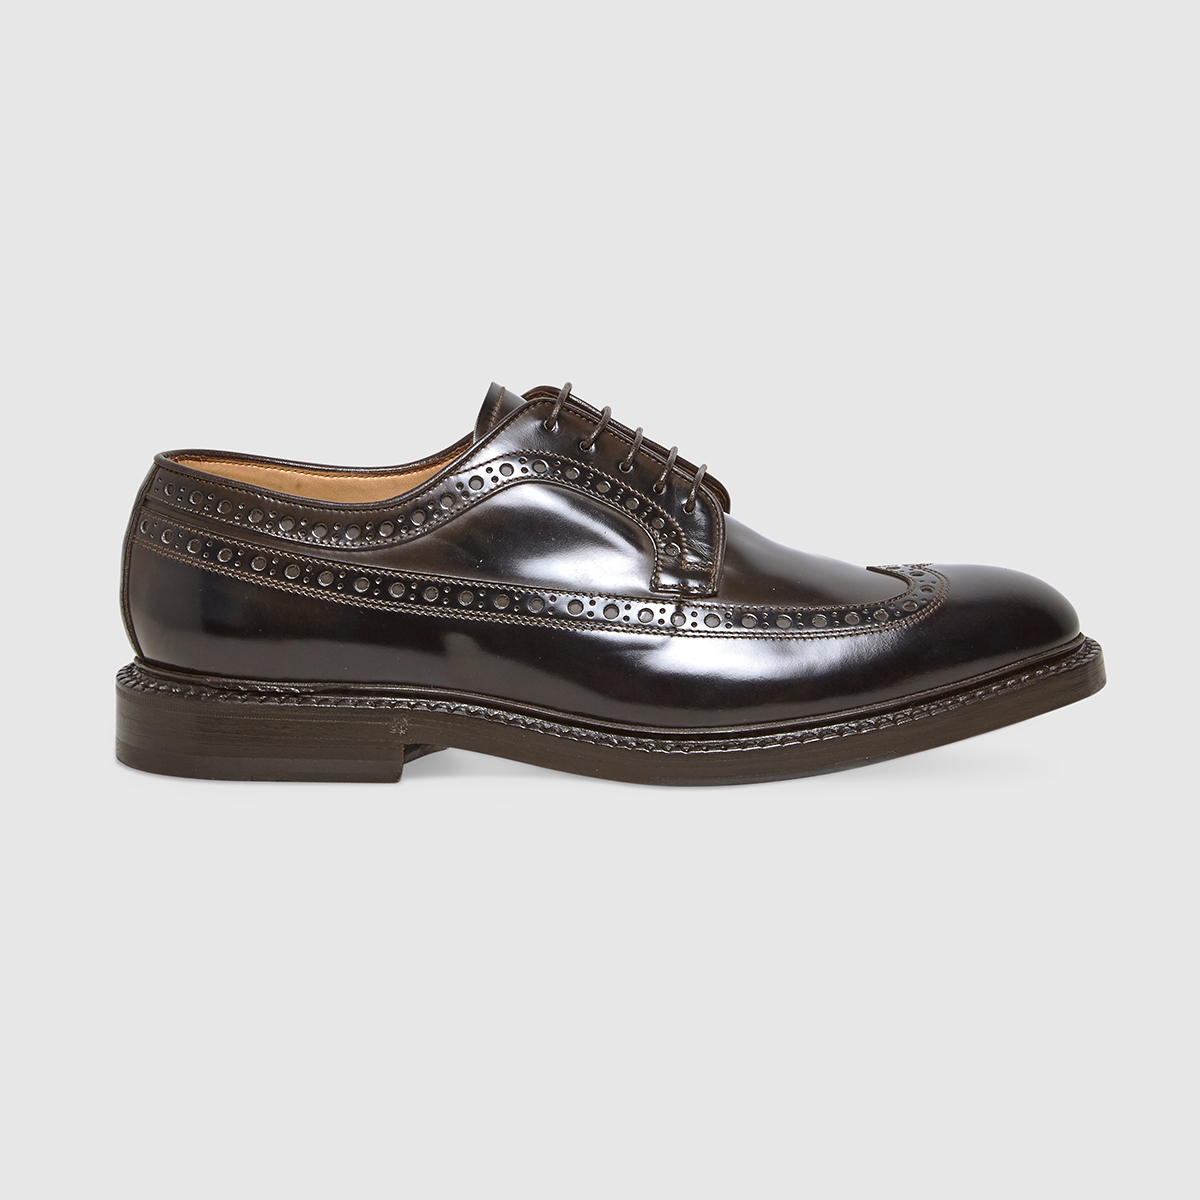 Lace-up Shoes in Brogue Brown Calfskin Leather Gruppo Fabi on sale 2022